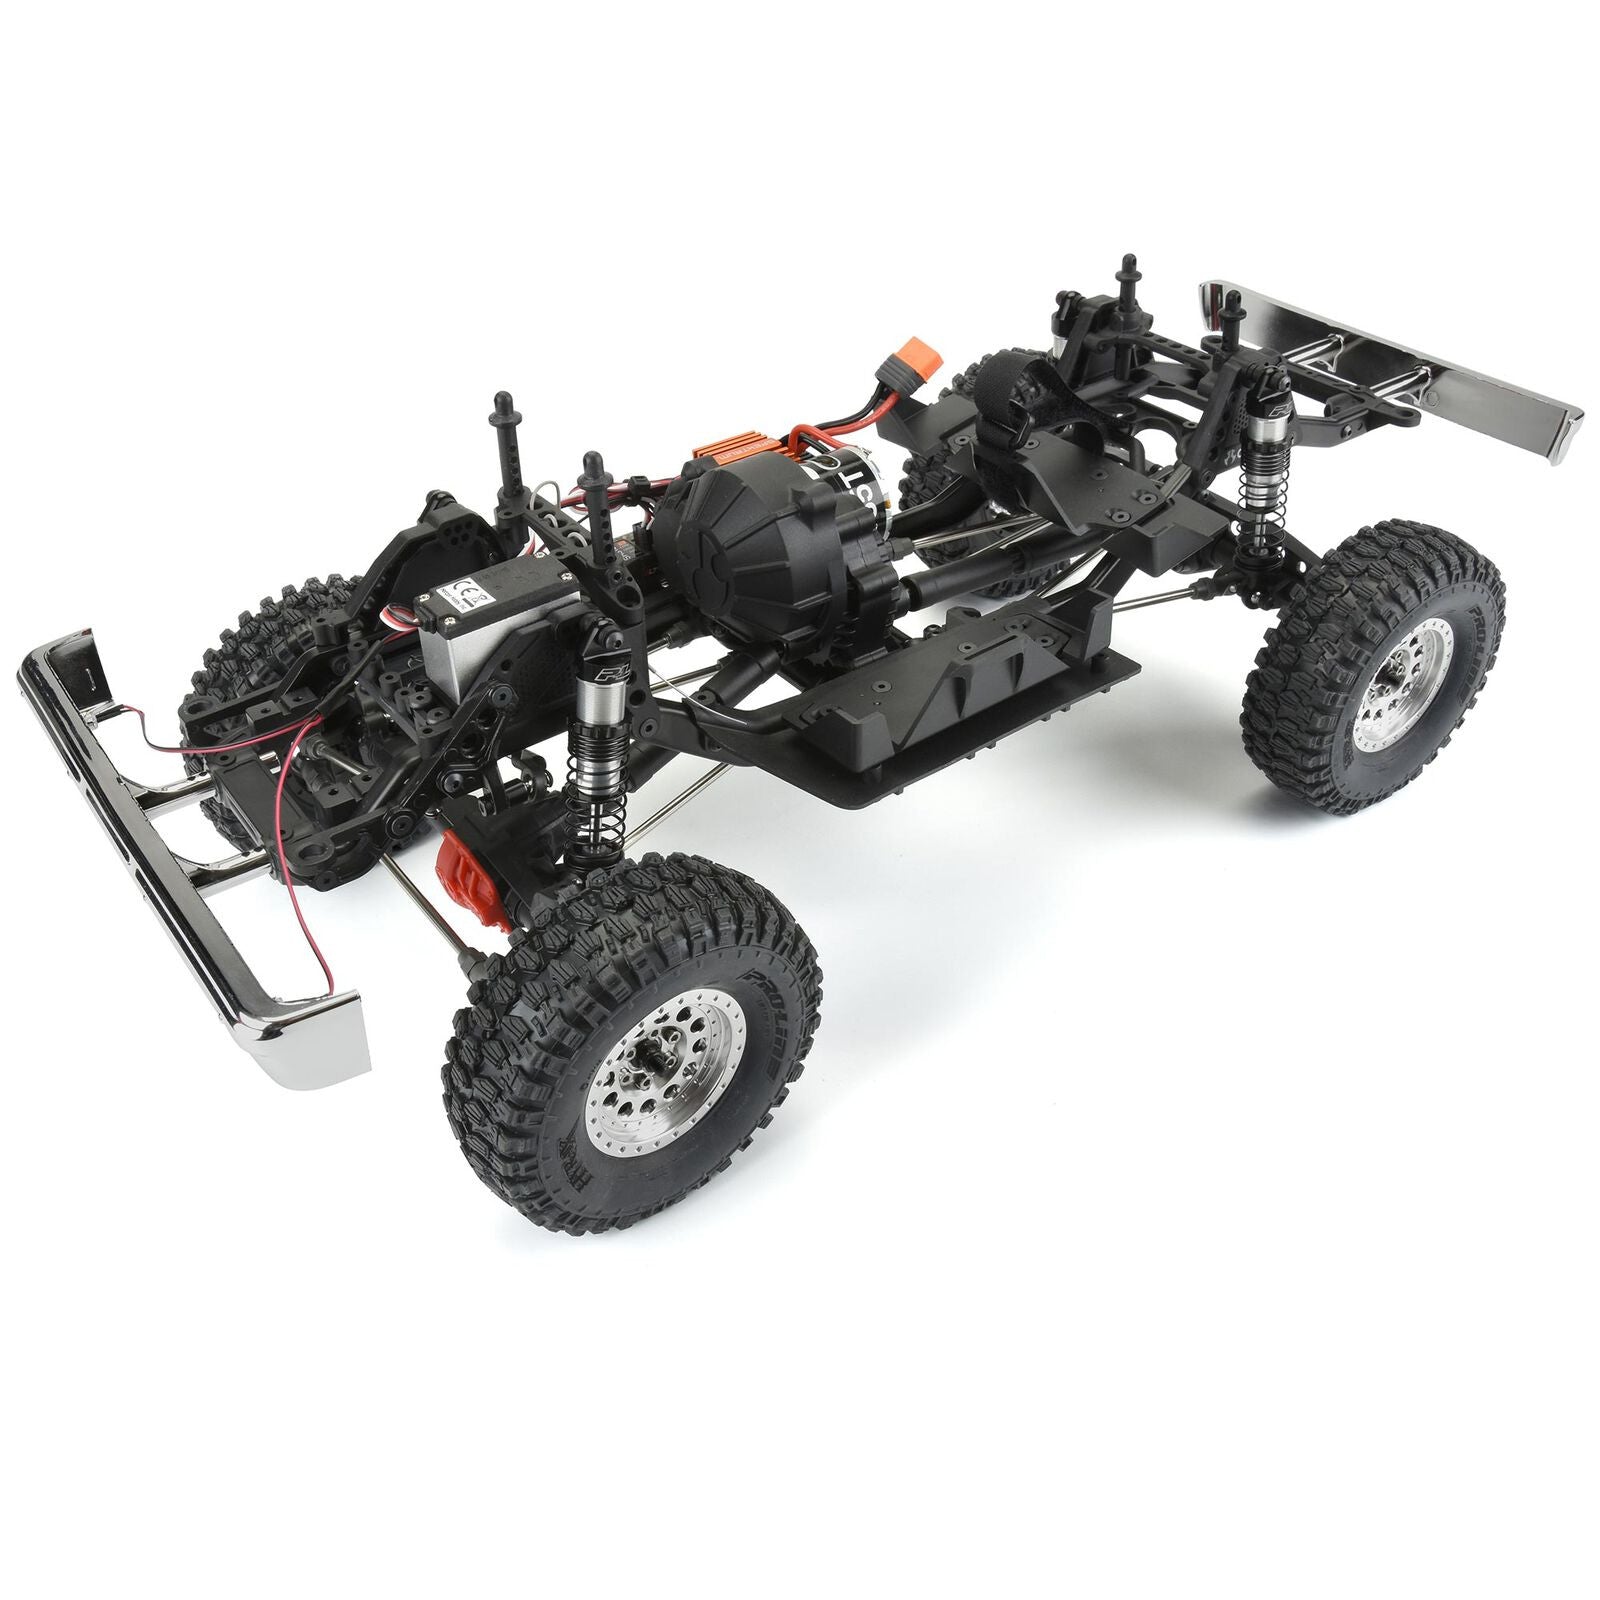 Axial SCX10 III Pro-LineChevy 1982 K10 4WD RTR AXI03029